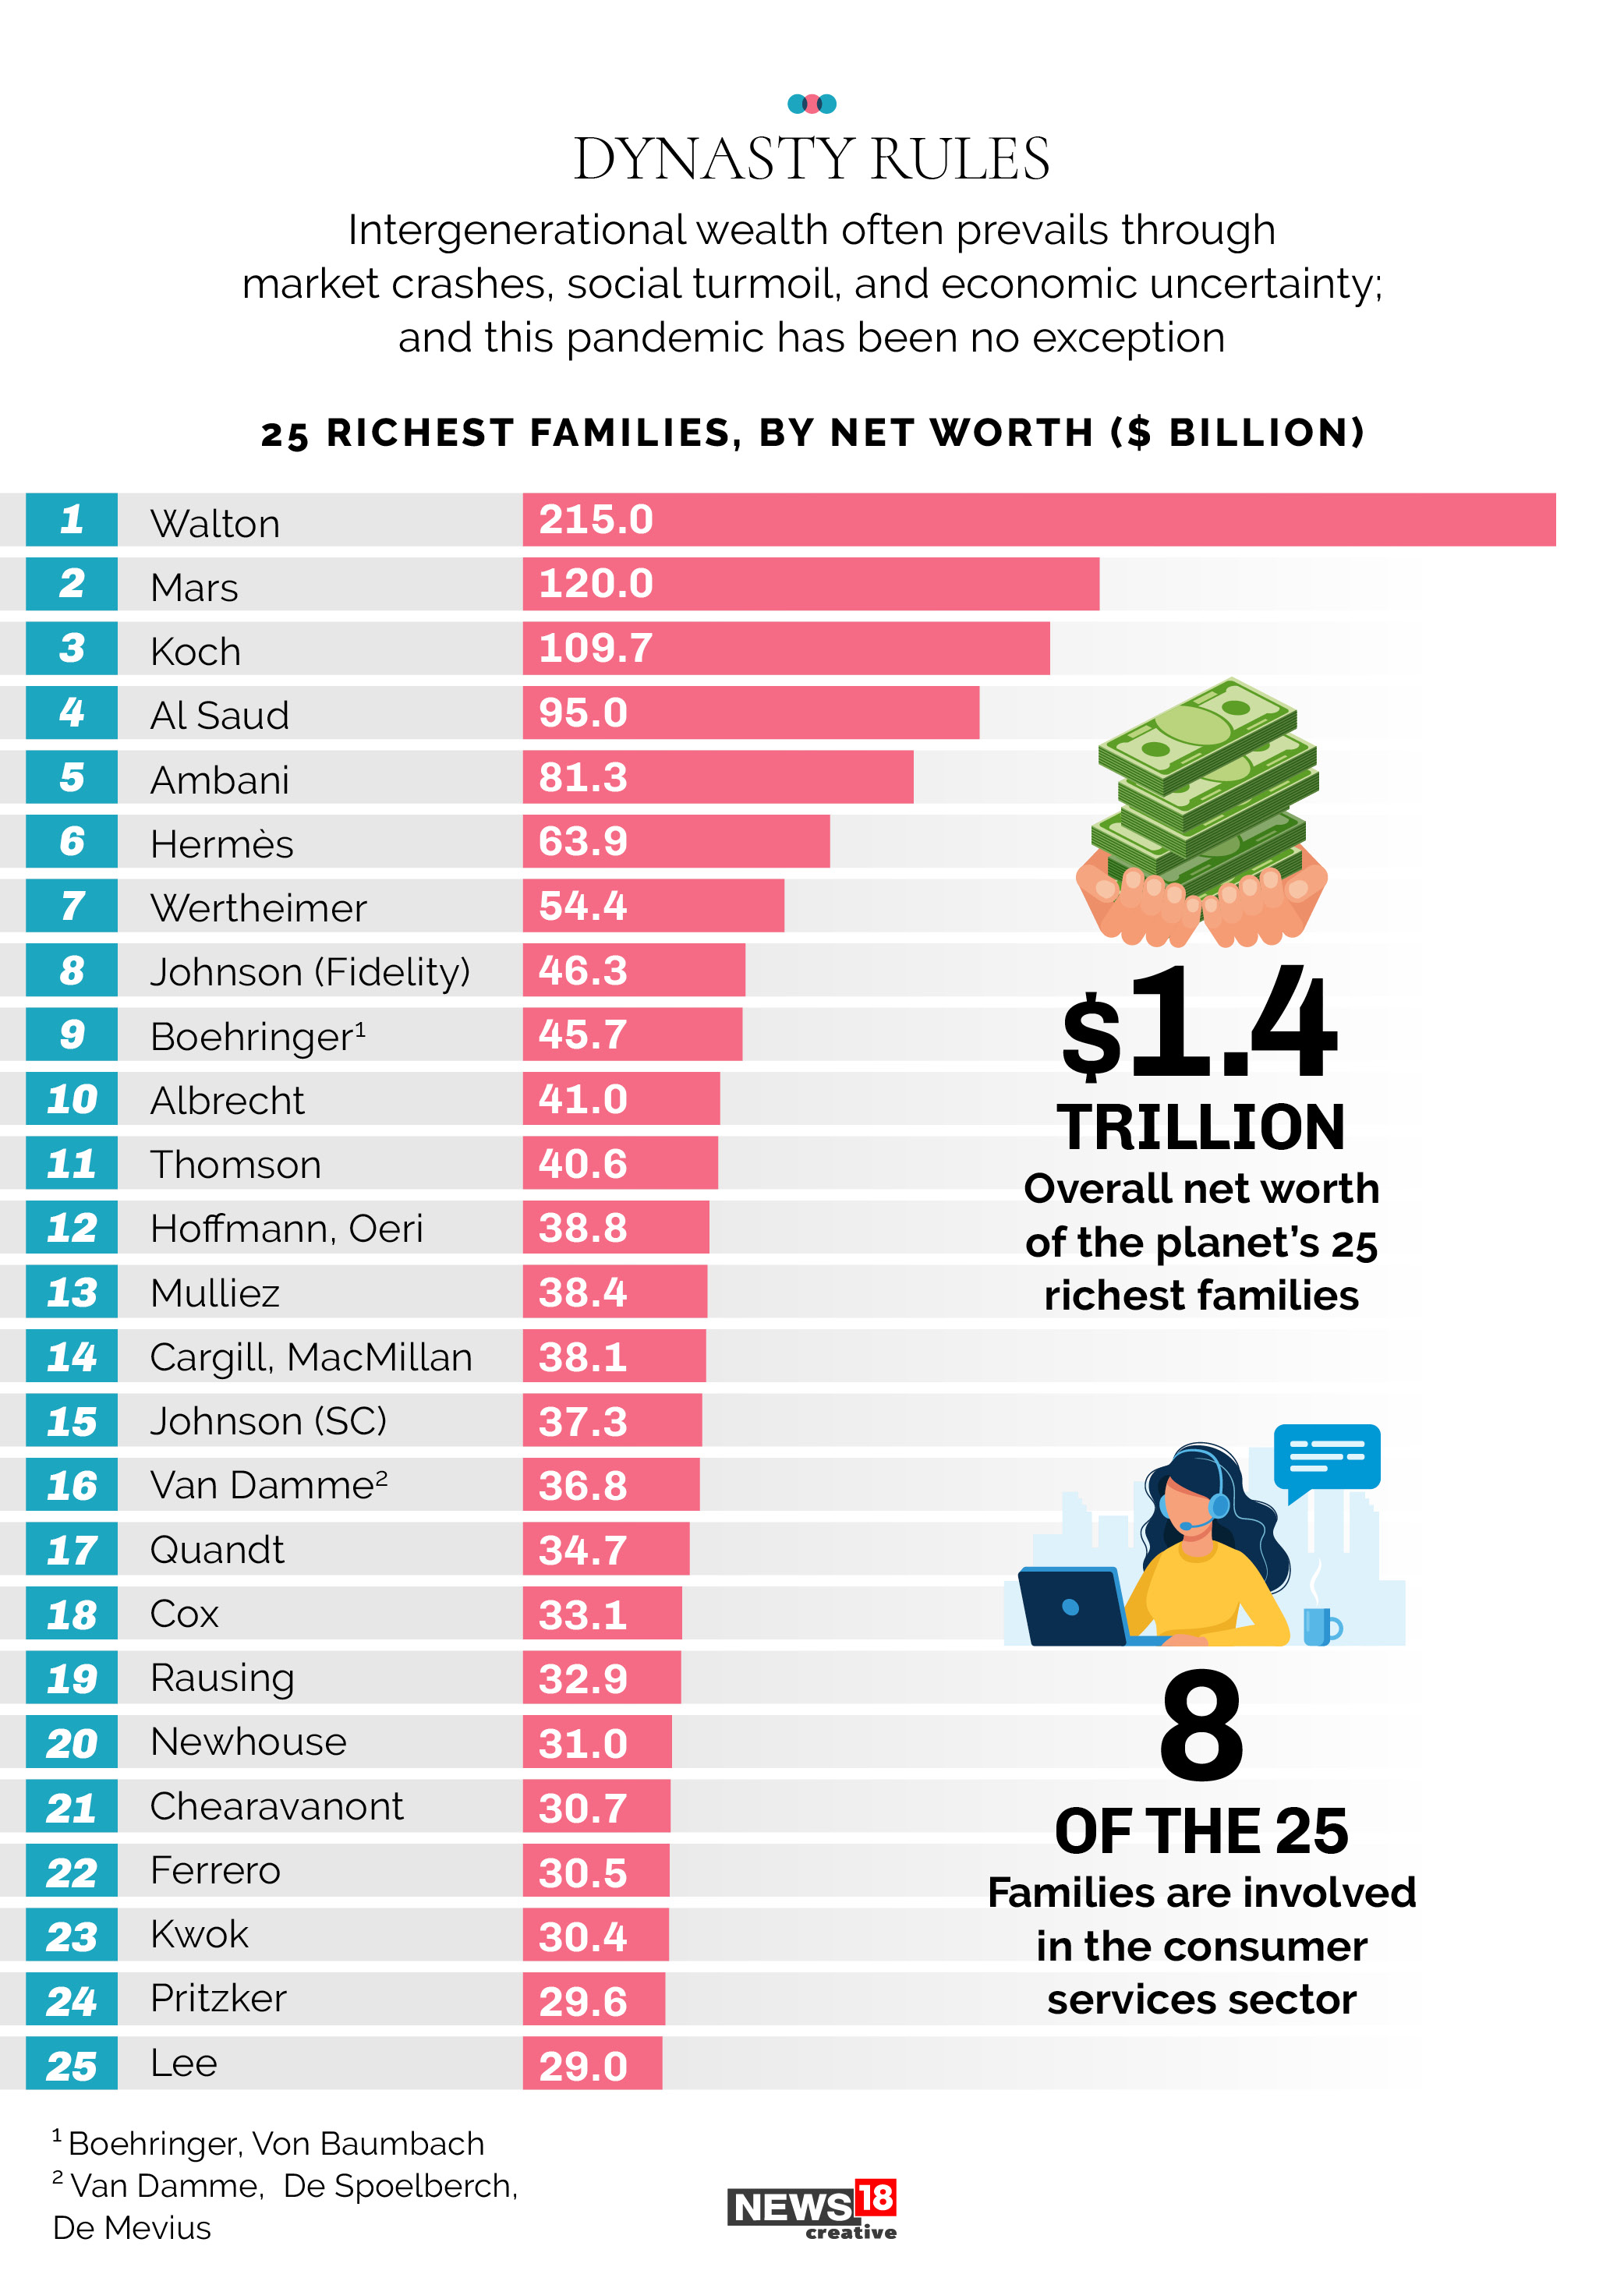 The world's richest families are...